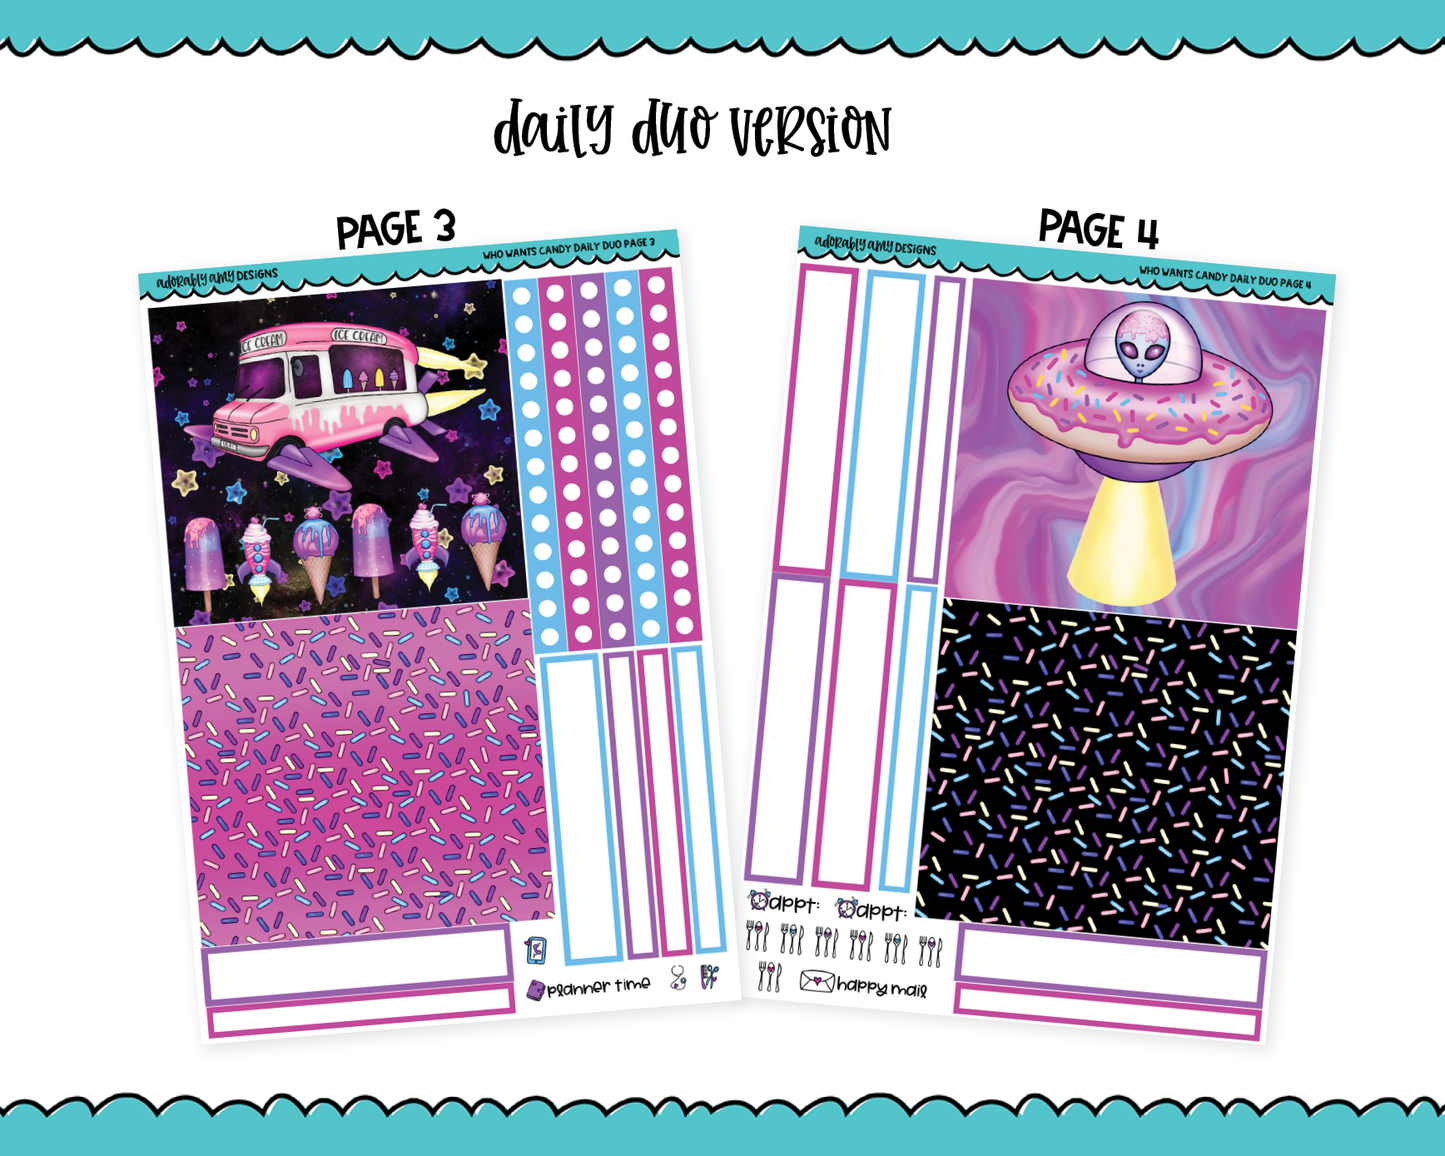 Daily Duo Who Wants Candy Themed Weekly Planner Sticker Kit for Daily Duo Planner